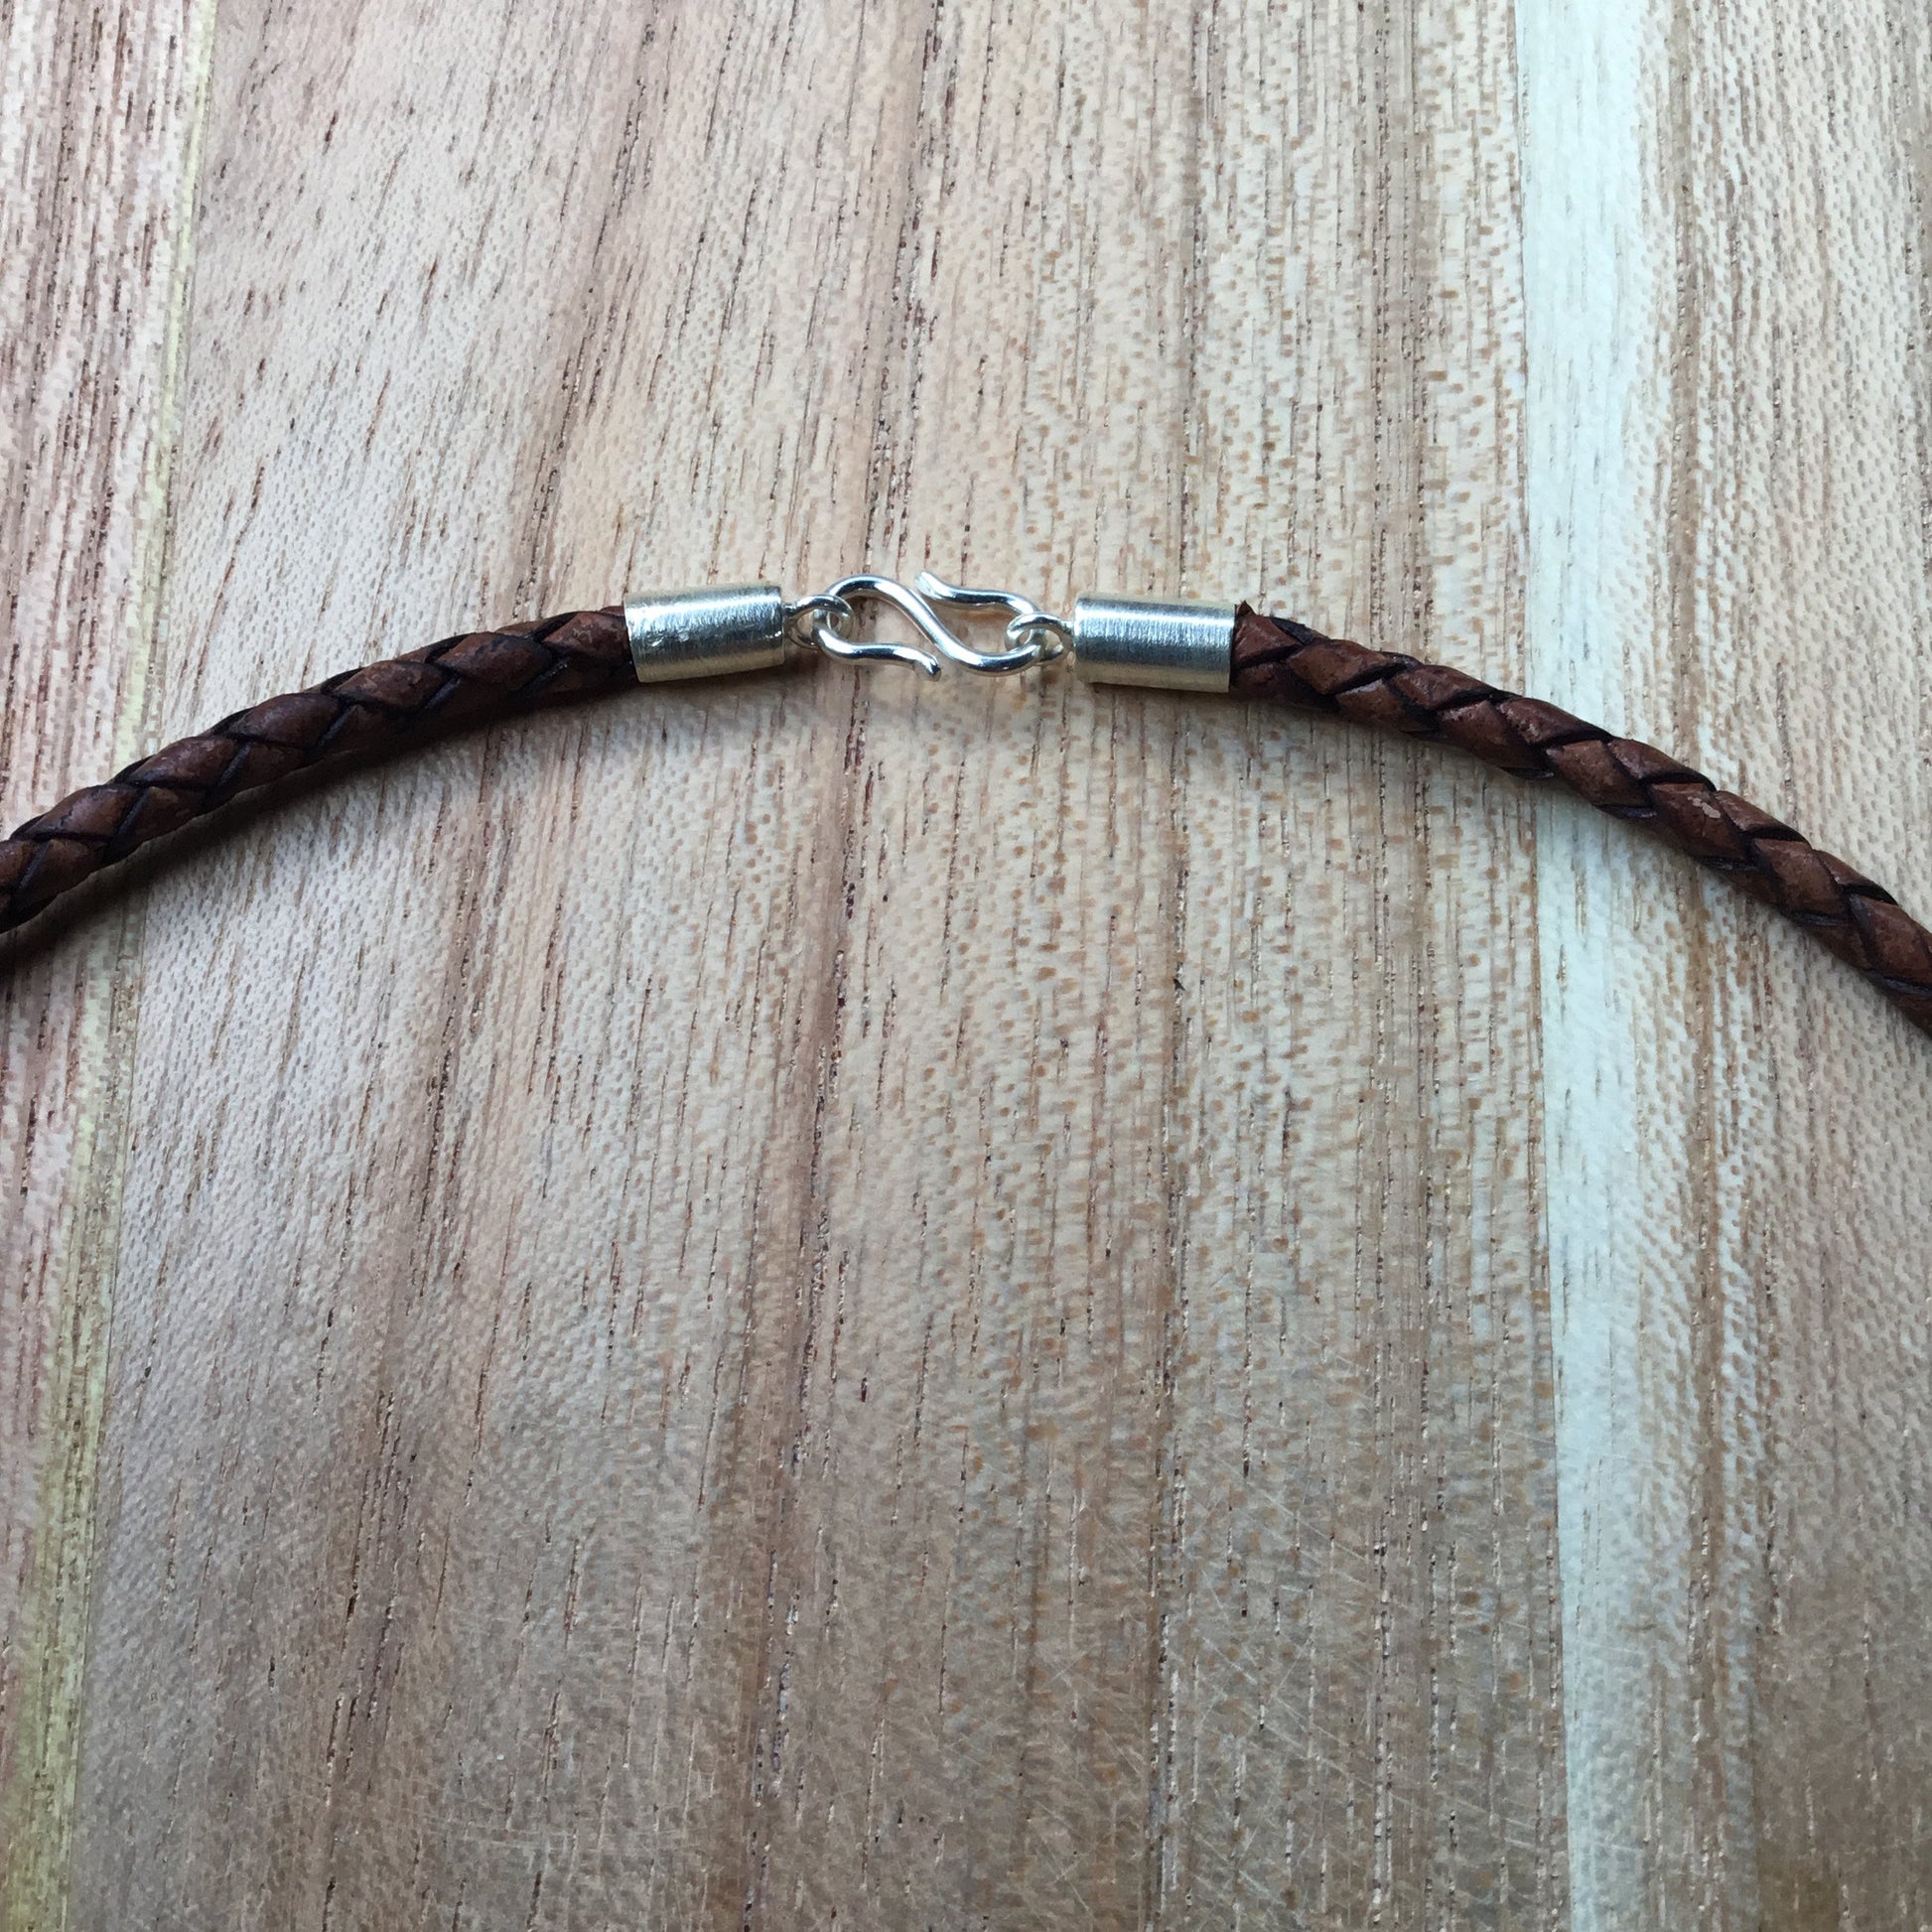 braided leather necklace cord, sterling silver hook.